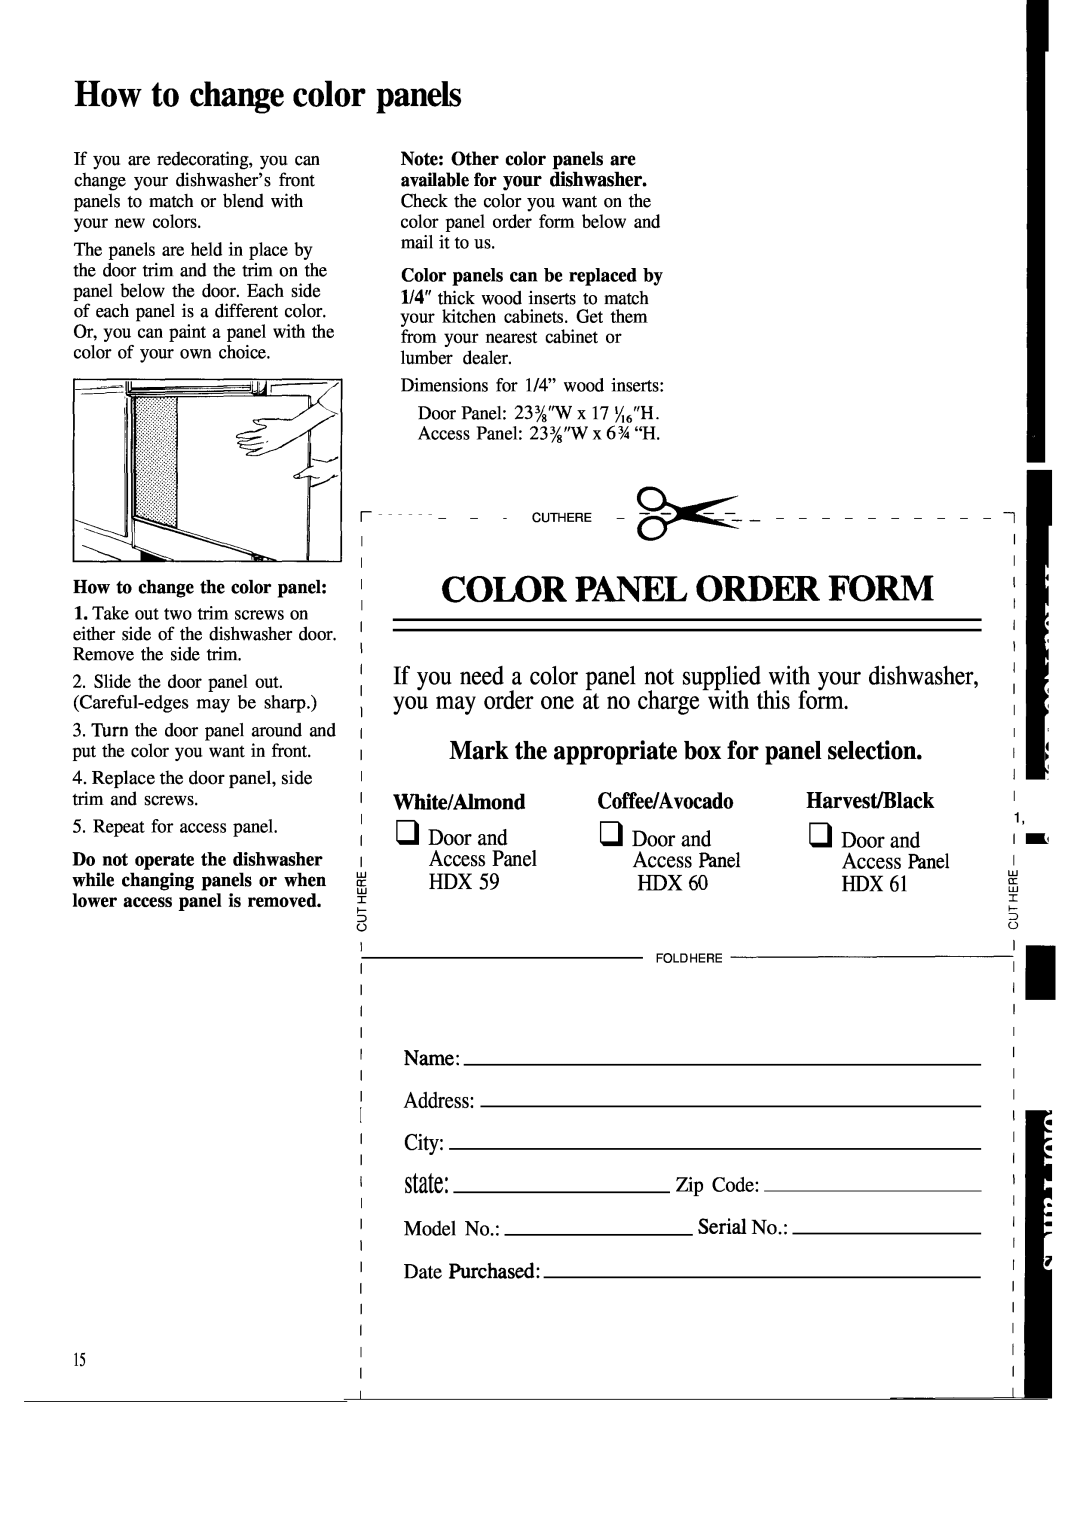 Hotpoint HDA950G manual How to chaWe color panek, you may order one at no charge with this form, Wte/Ahnond, state 